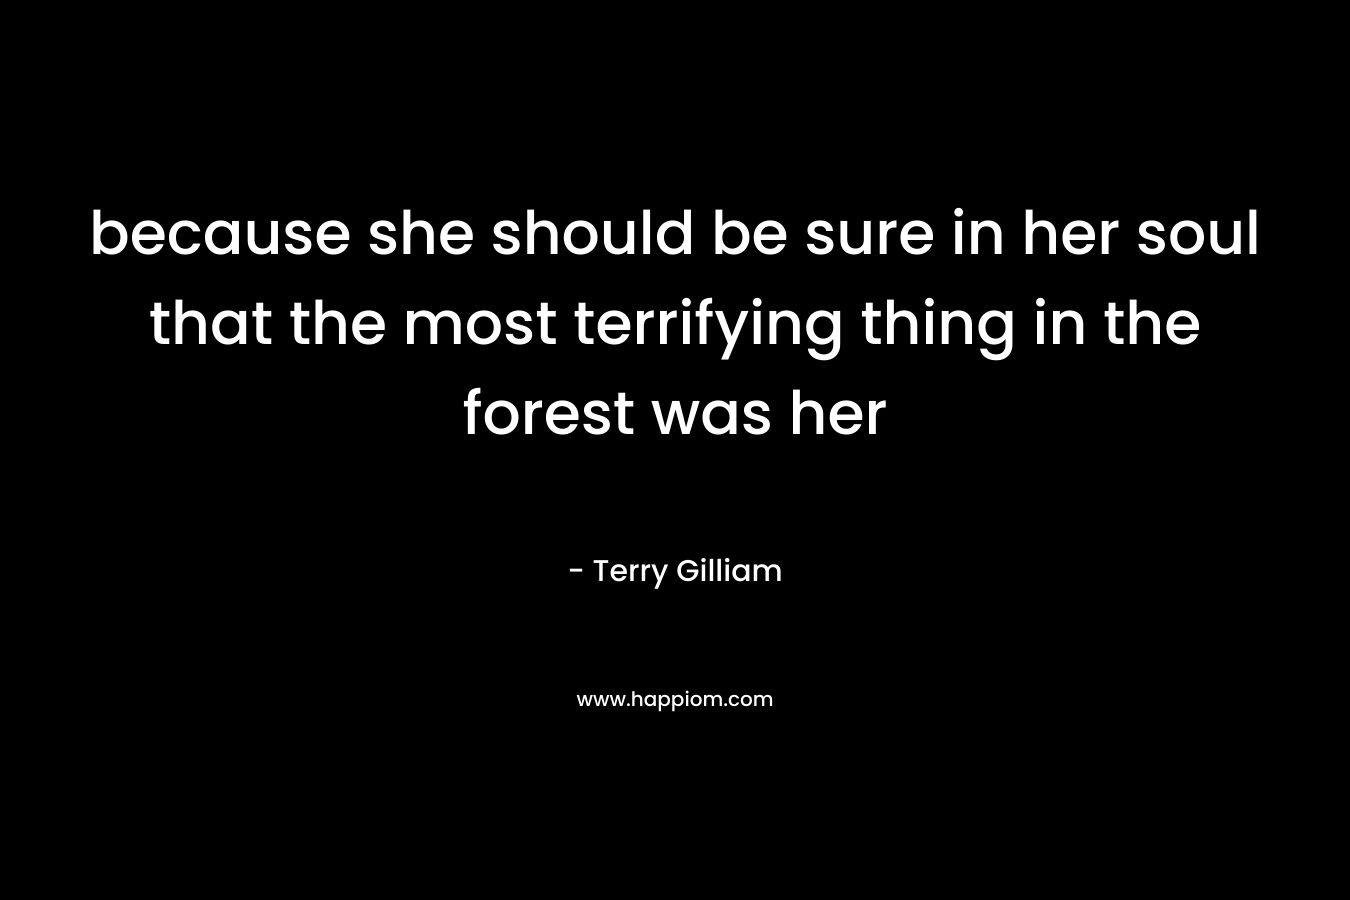 because she should be sure in her soul that the most terrifying thing in the forest was her – Terry Gilliam